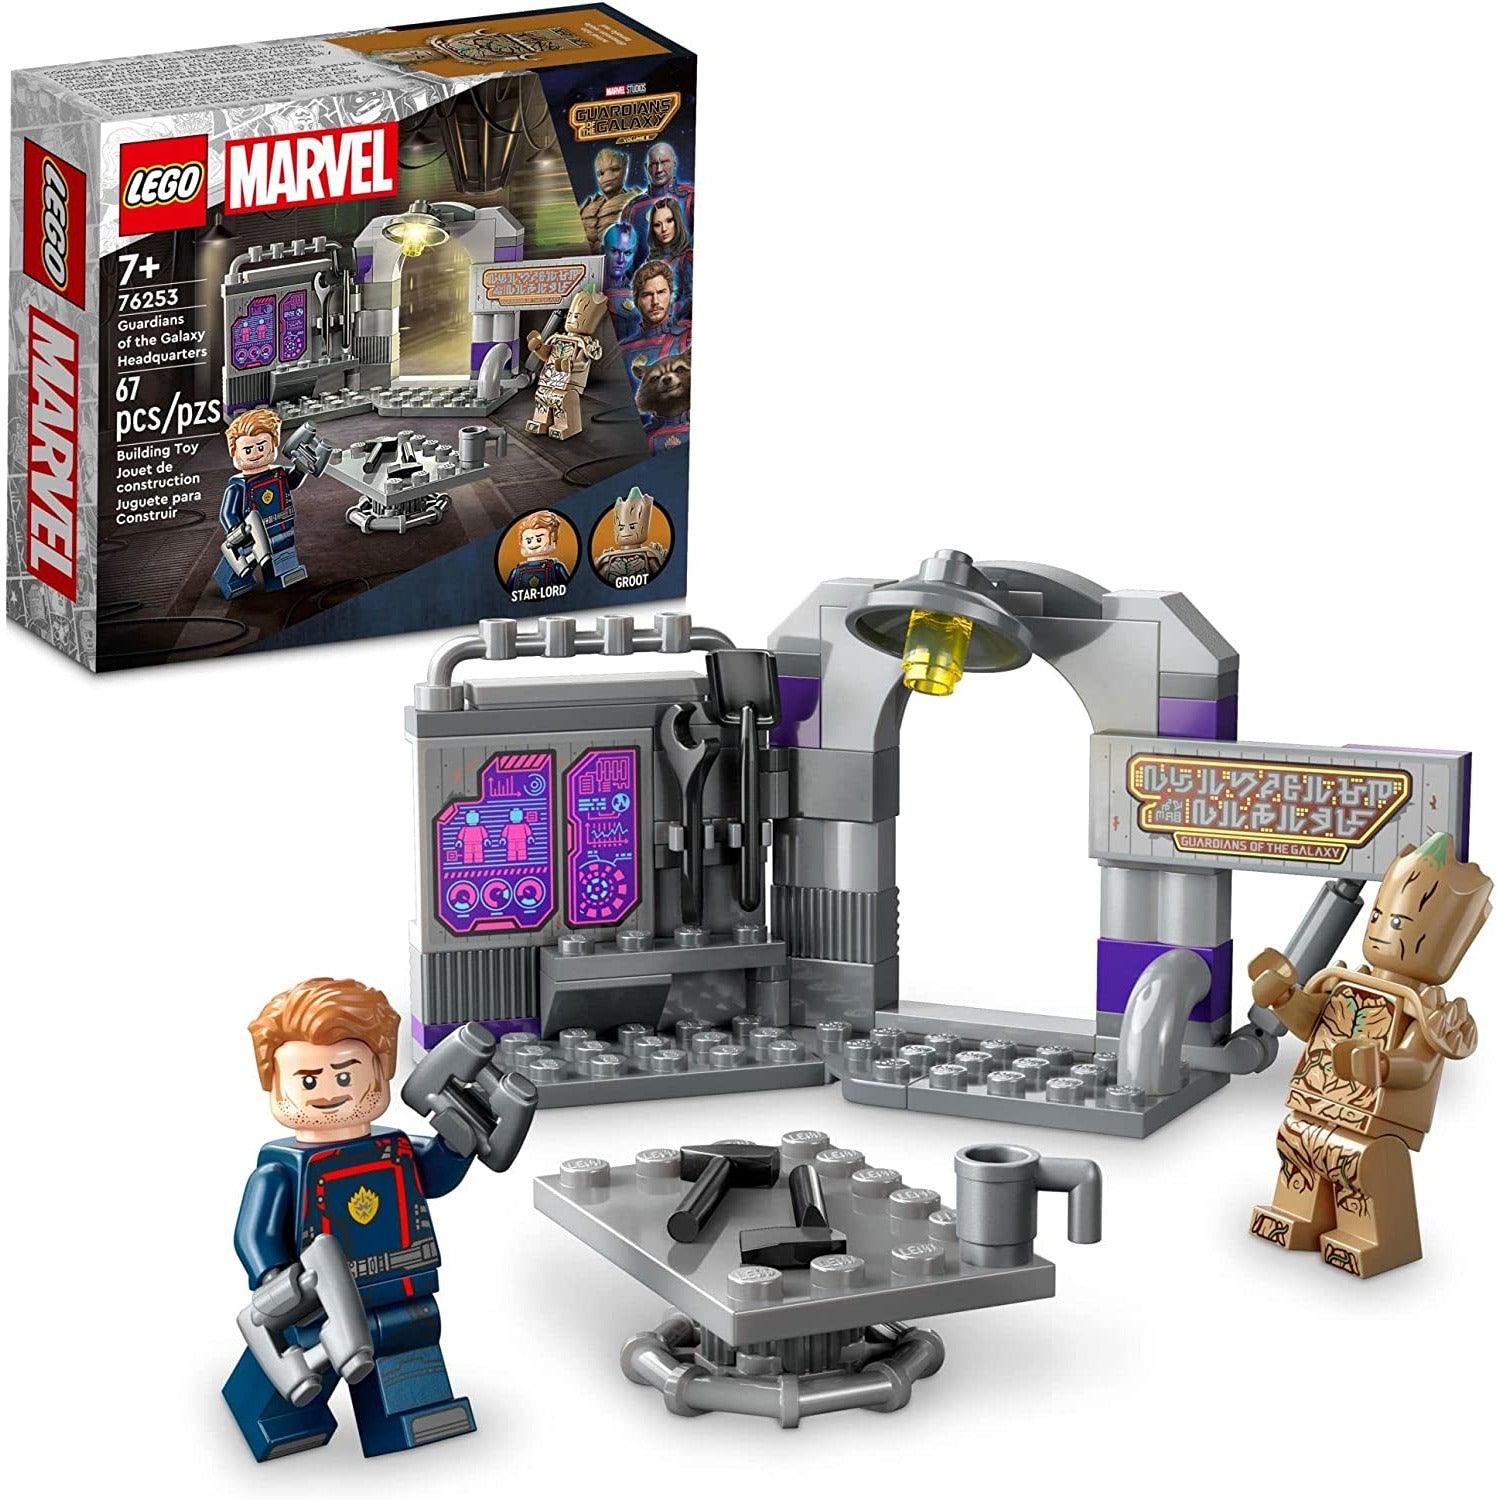 LEGO 76253 Marvel Guardians of The Galaxy Headquarters, Super Hero Building Toy Set